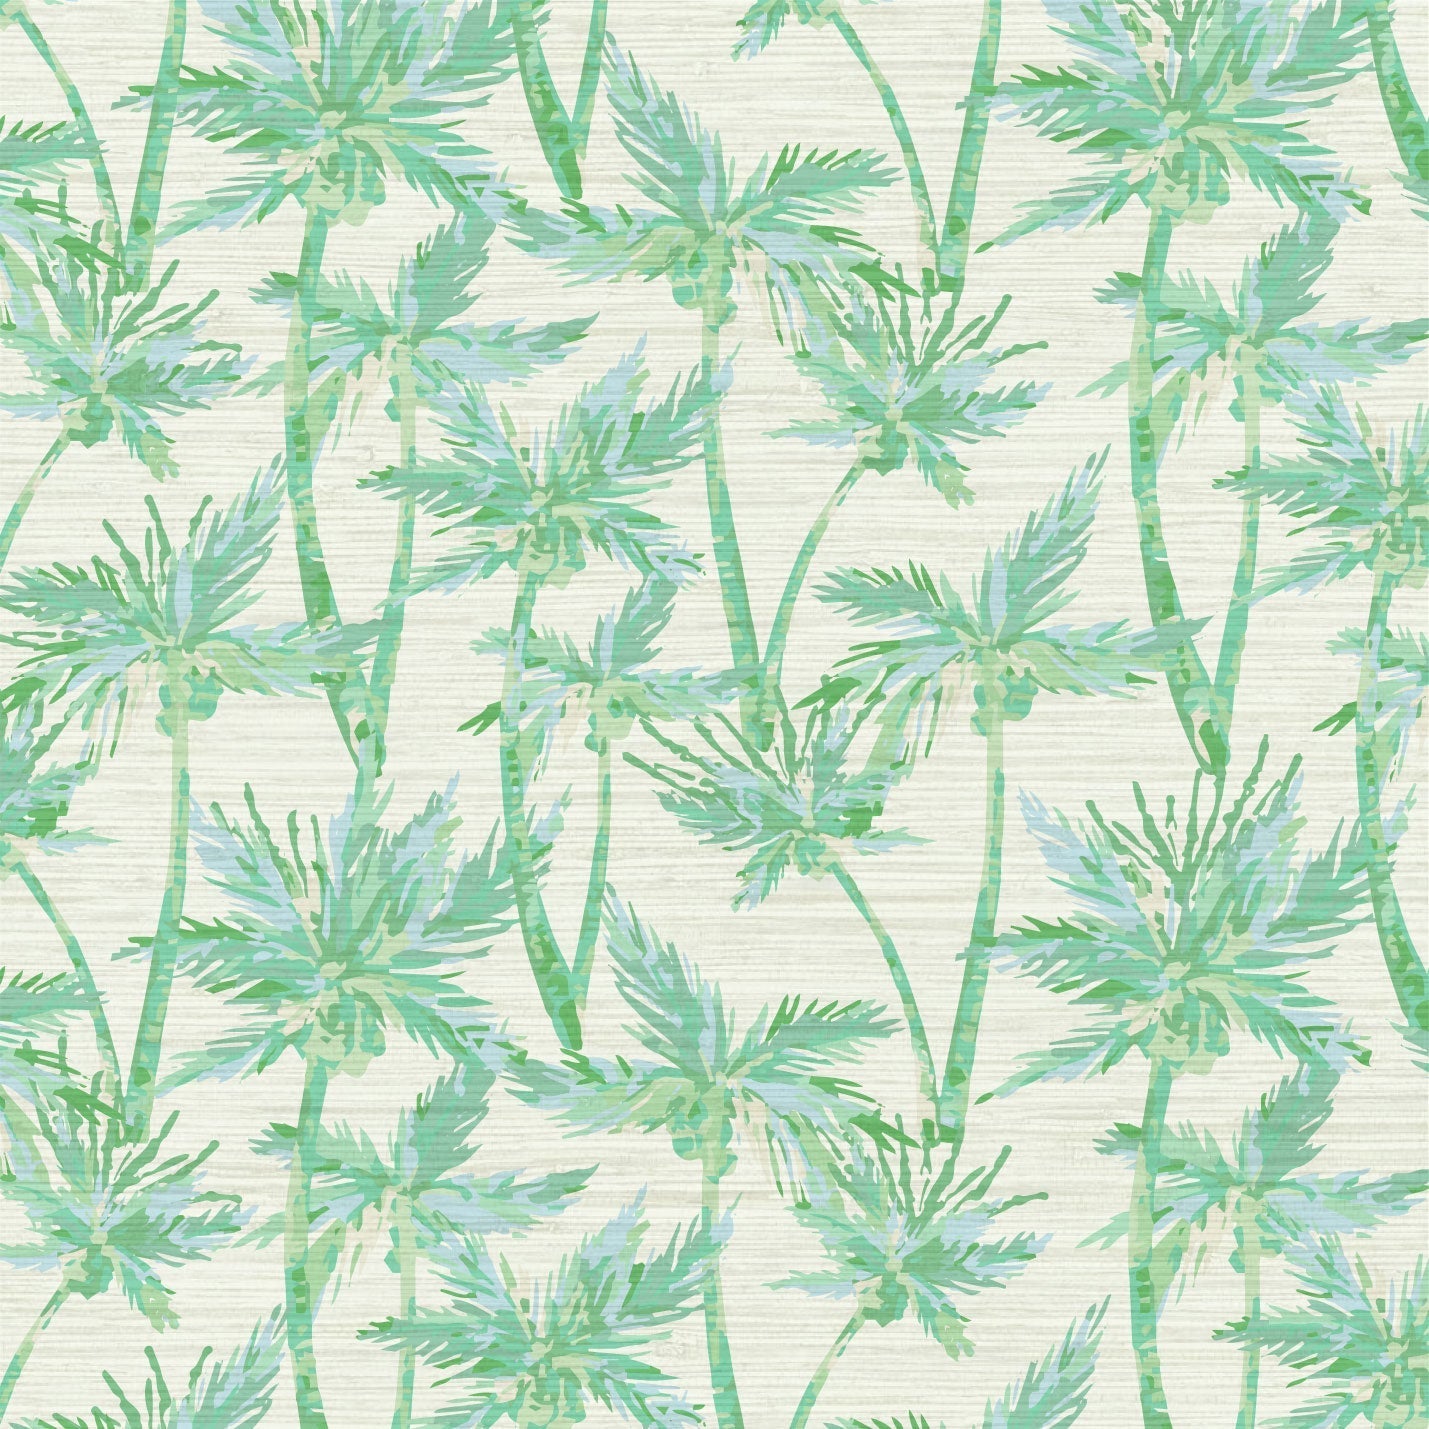 Grasscloth wallpaper Natural Textured Eco-Friendly Non-toxic High-quality Sustainable Interior Design Bold Custom Tailor-made Retro chic Tropical Jungle Coastal Garden Seaside Coastal Seashore Waterfront Vacation home styling Retreat Relaxed beach vibes Beach cottage Shoreline Oceanfront nature palm tree palms tonal cream off-white beige green jungle mint sage